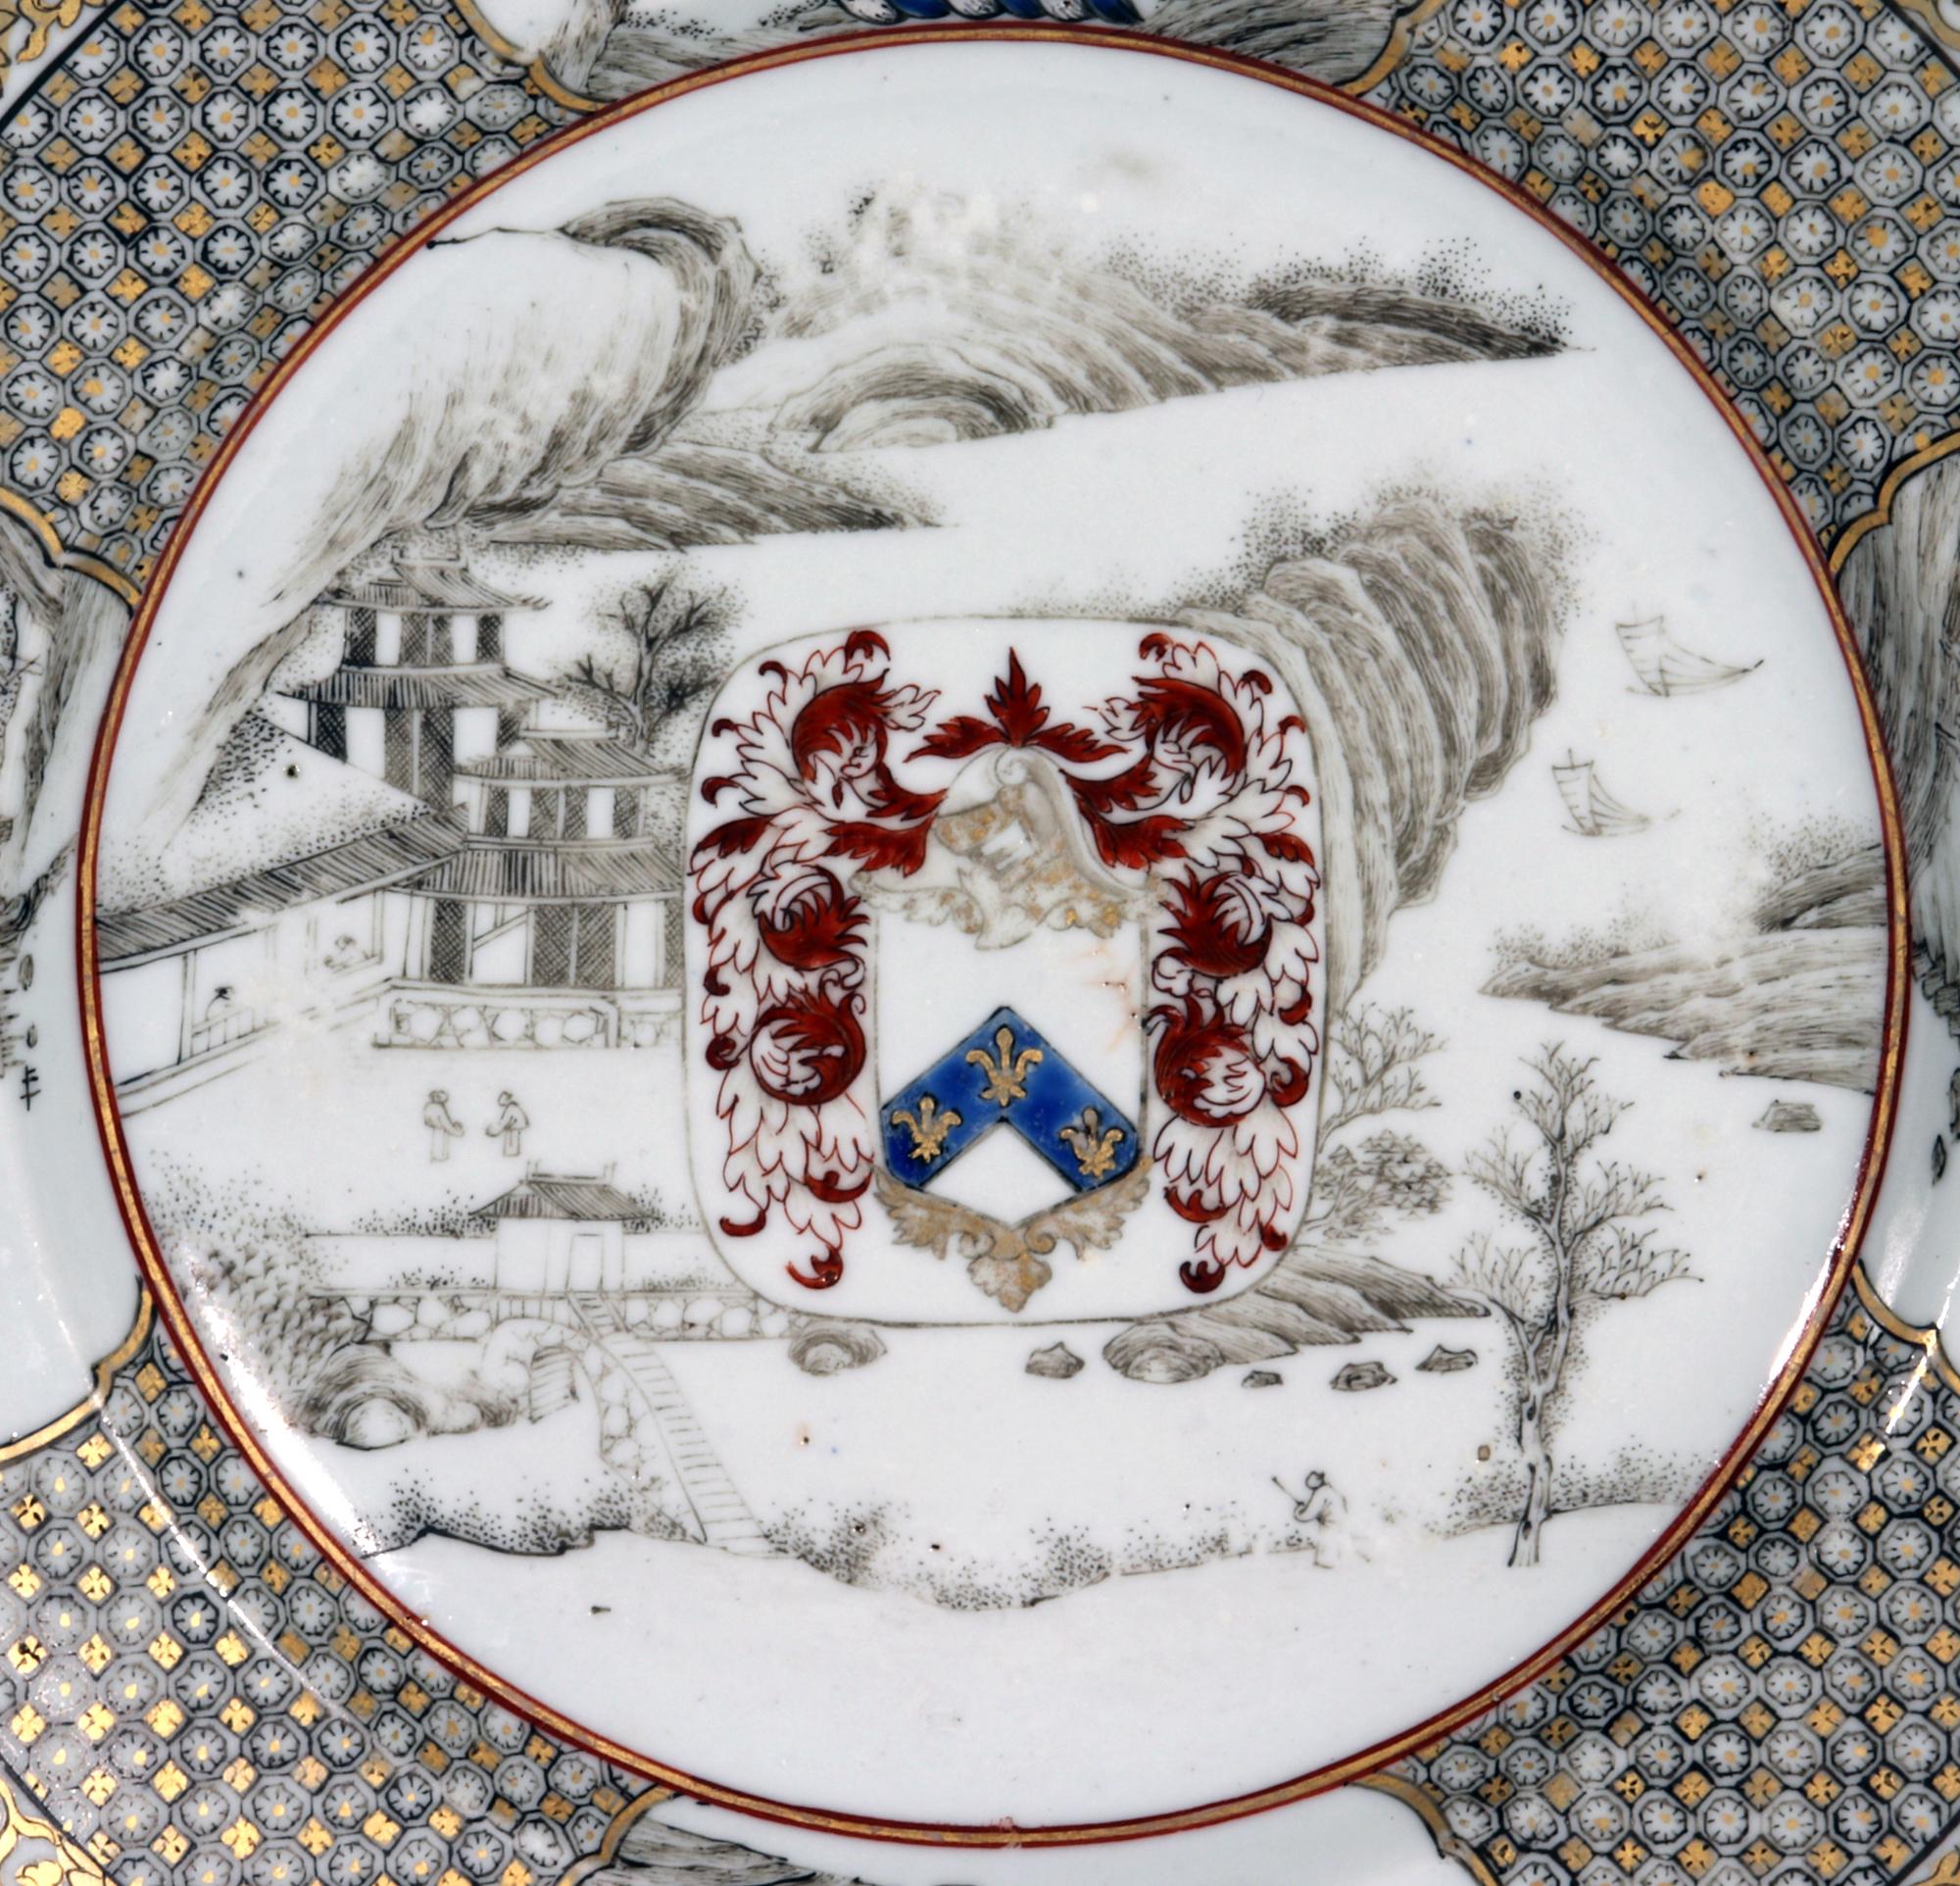 Yongzheng Chinese Export Porcelain Plate with Arms of Elwick of Middlesex In Good Condition For Sale In Downingtown, PA